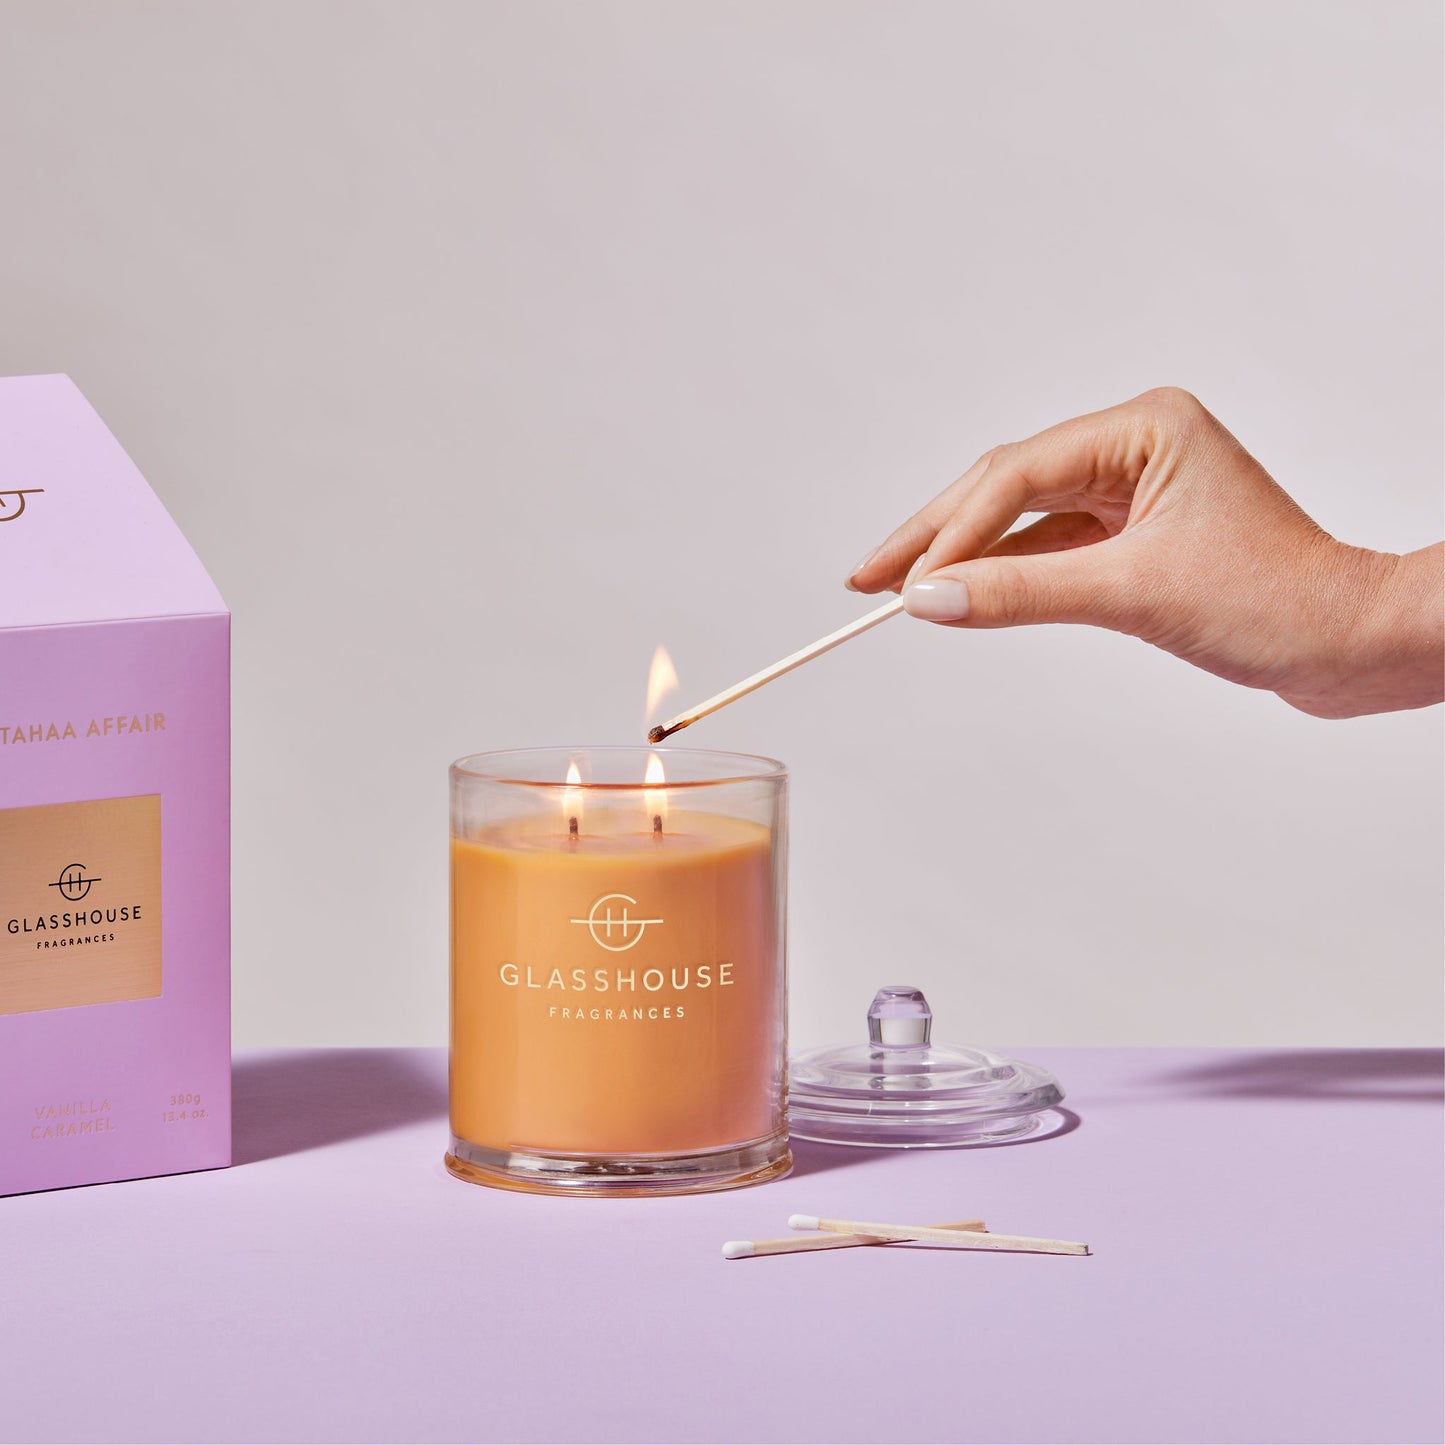 a person's hand lighting the A Tahaa Affair Triple Scented Candle while displayed next to the pink box